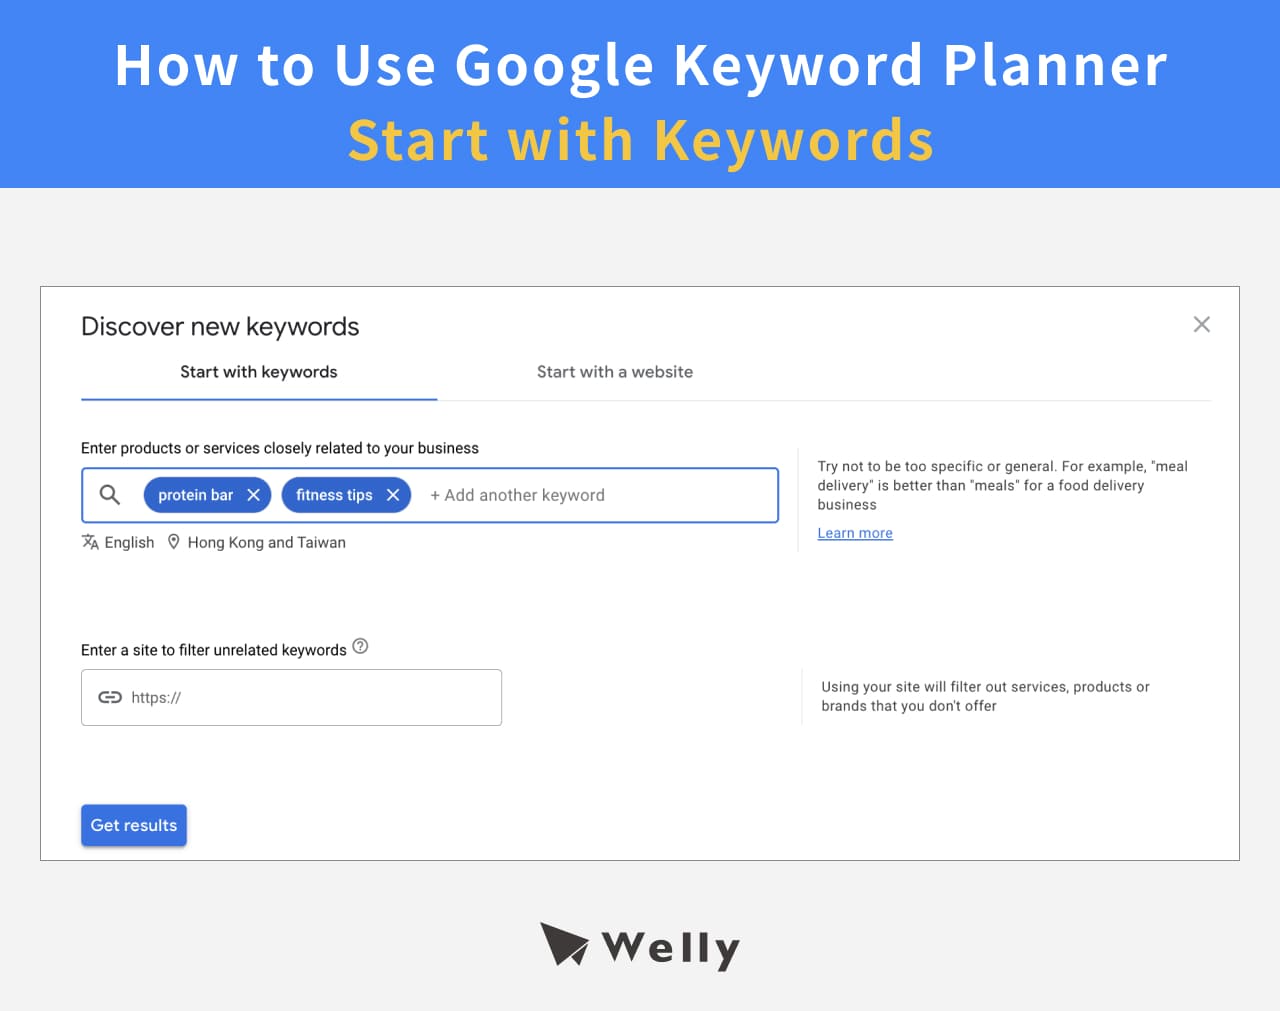 Start with Keywords